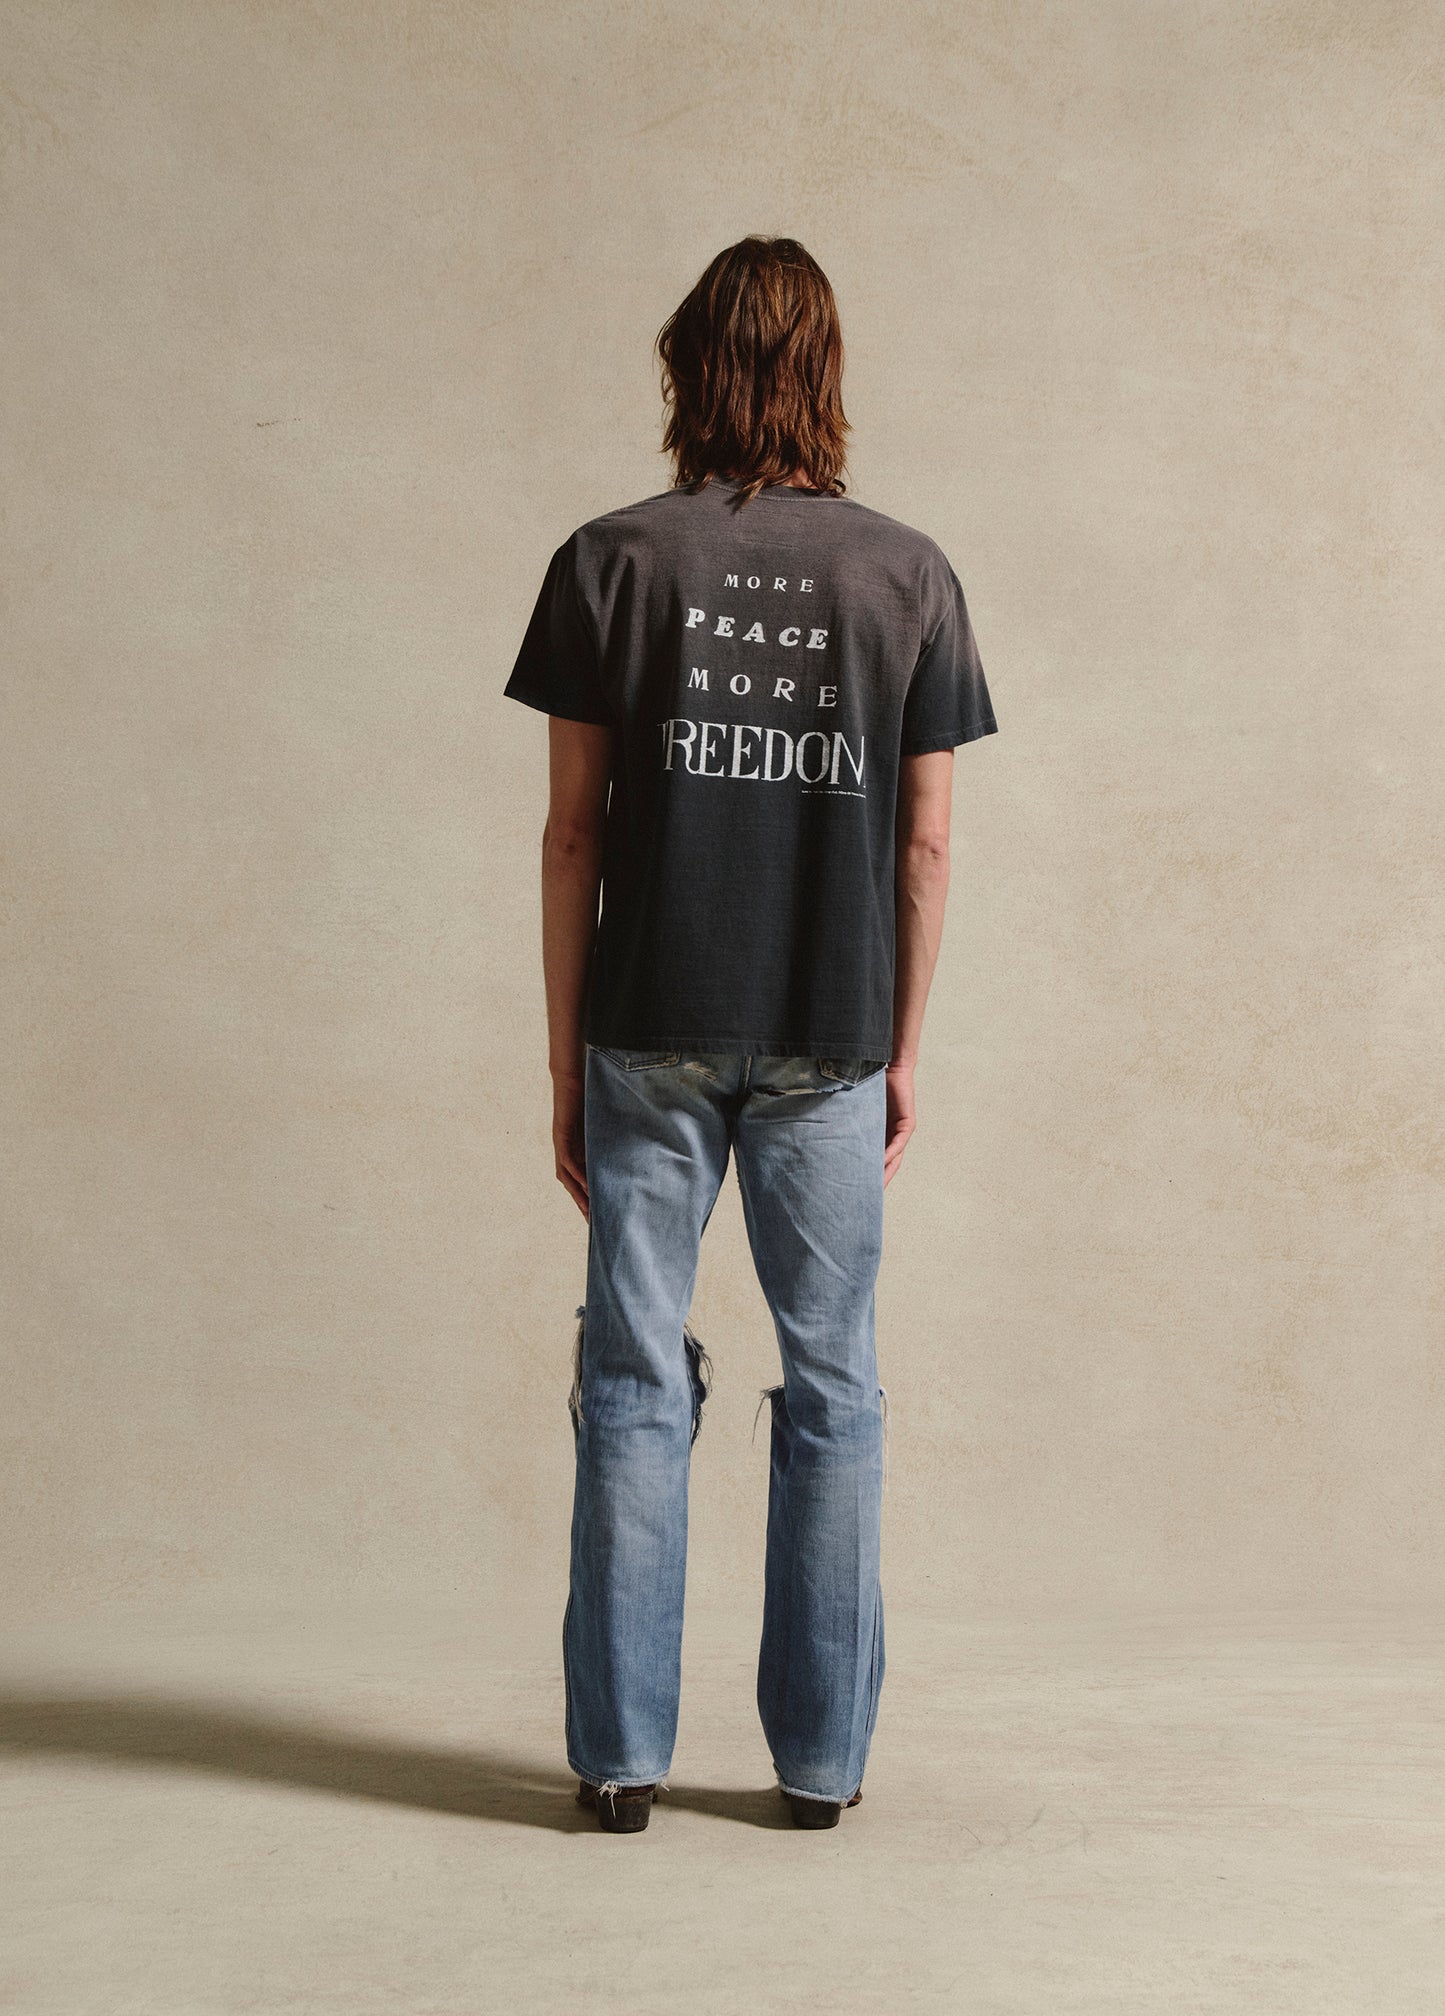 More Peace, More Freedom Tee | Washed Black